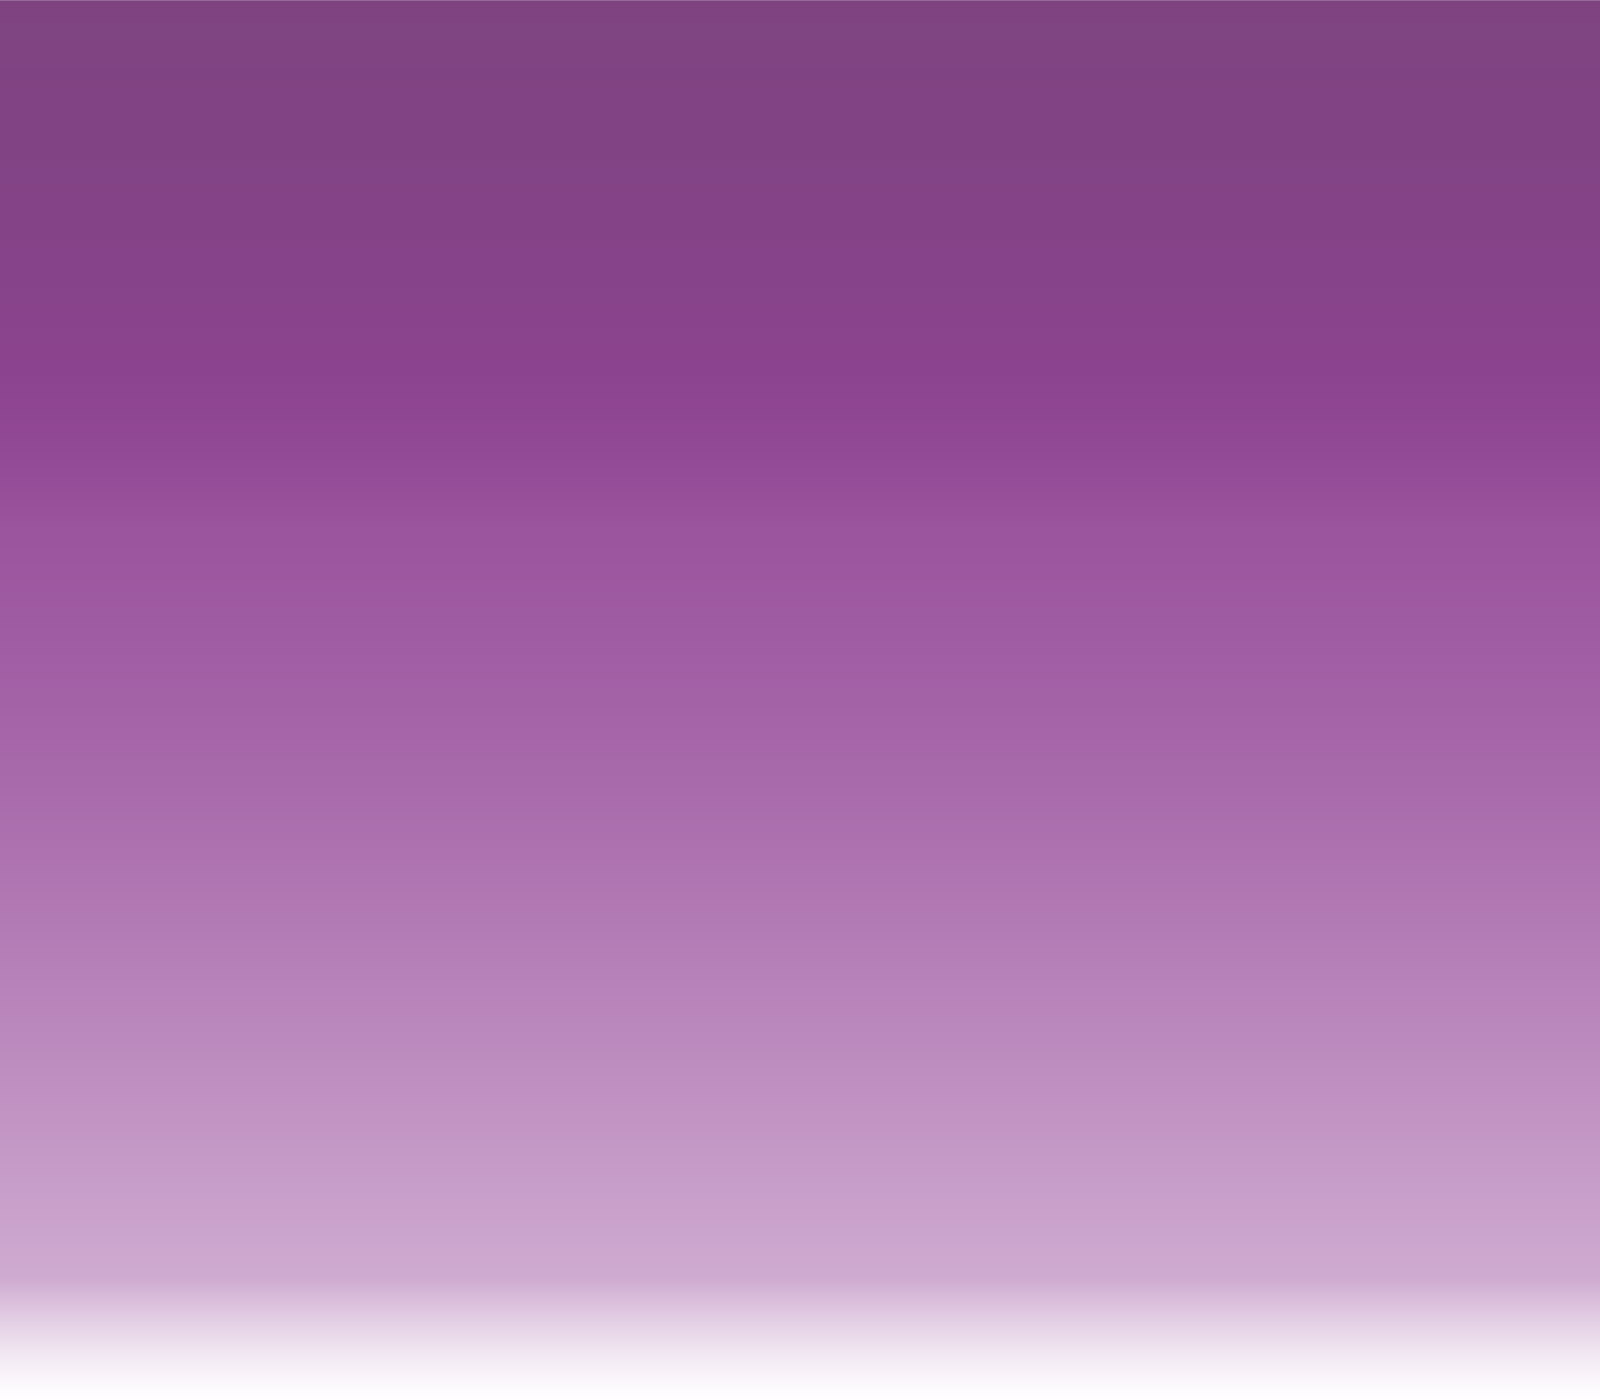 File:Solid purple.svg - Wikimedia Commons